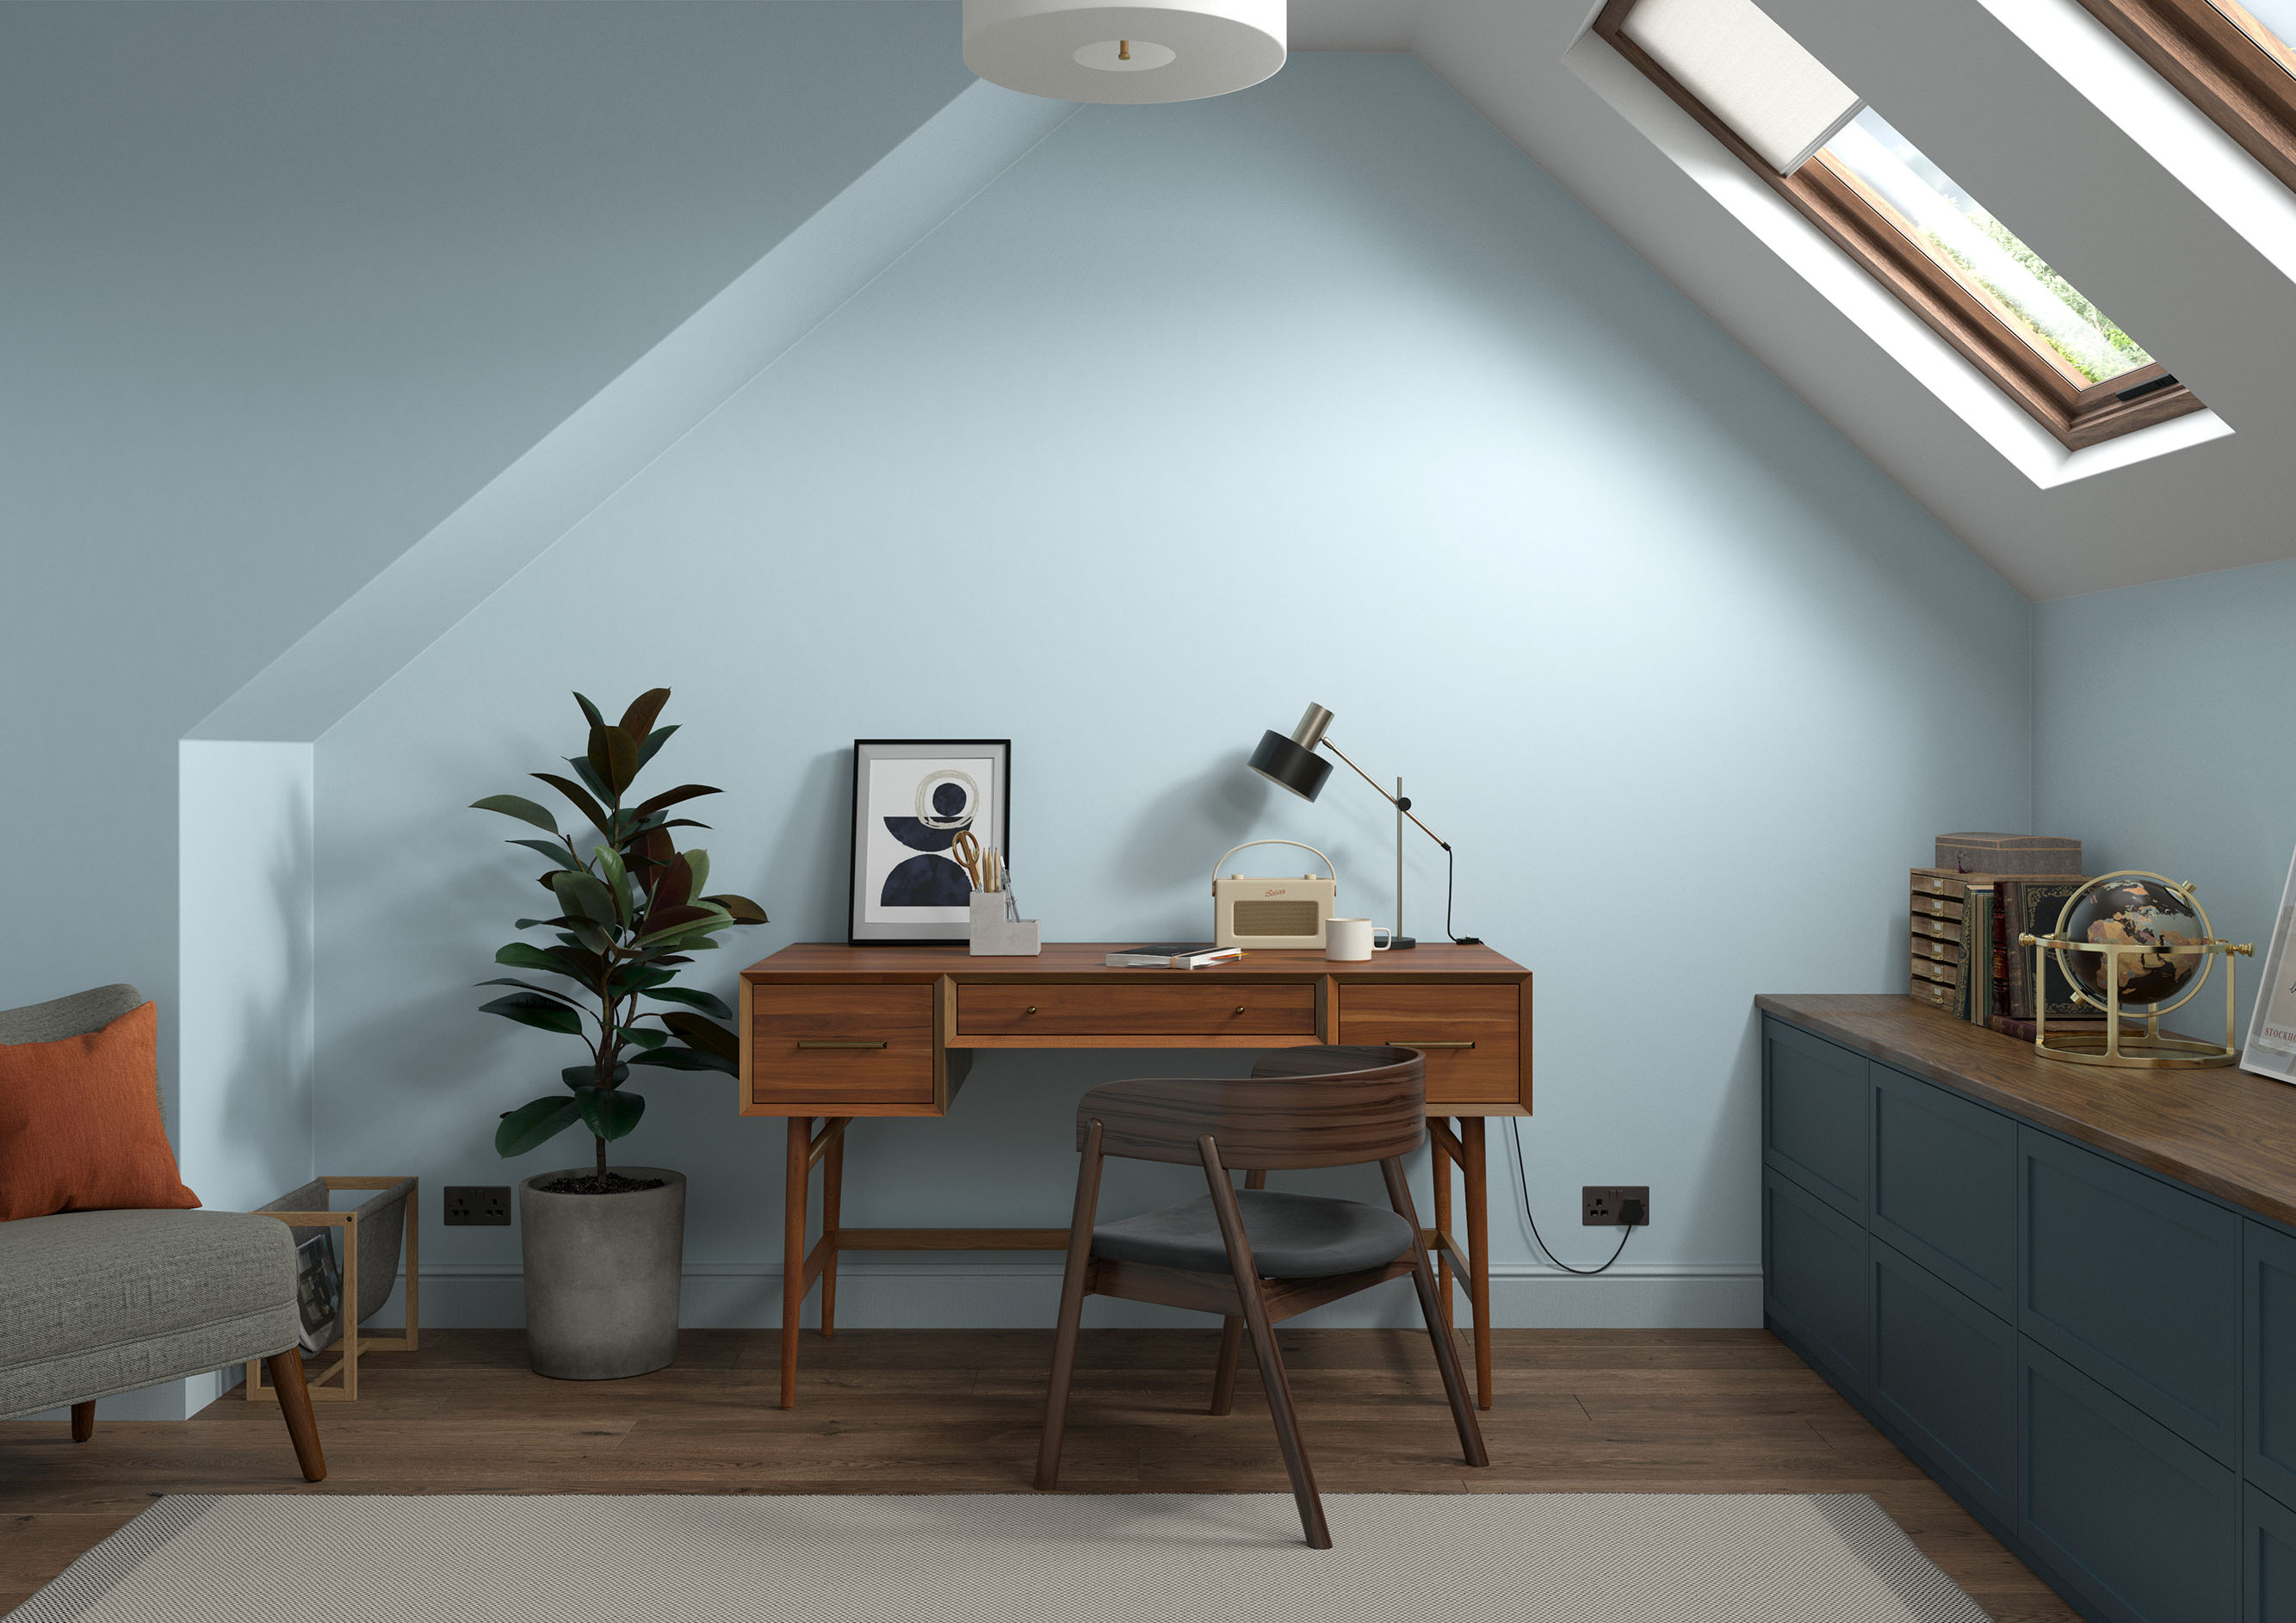 Office   Wall   Copenhagen Blue, Woodwork   Country Sky, Ceiling   Swedish White, Cabinet   Midnight Teal